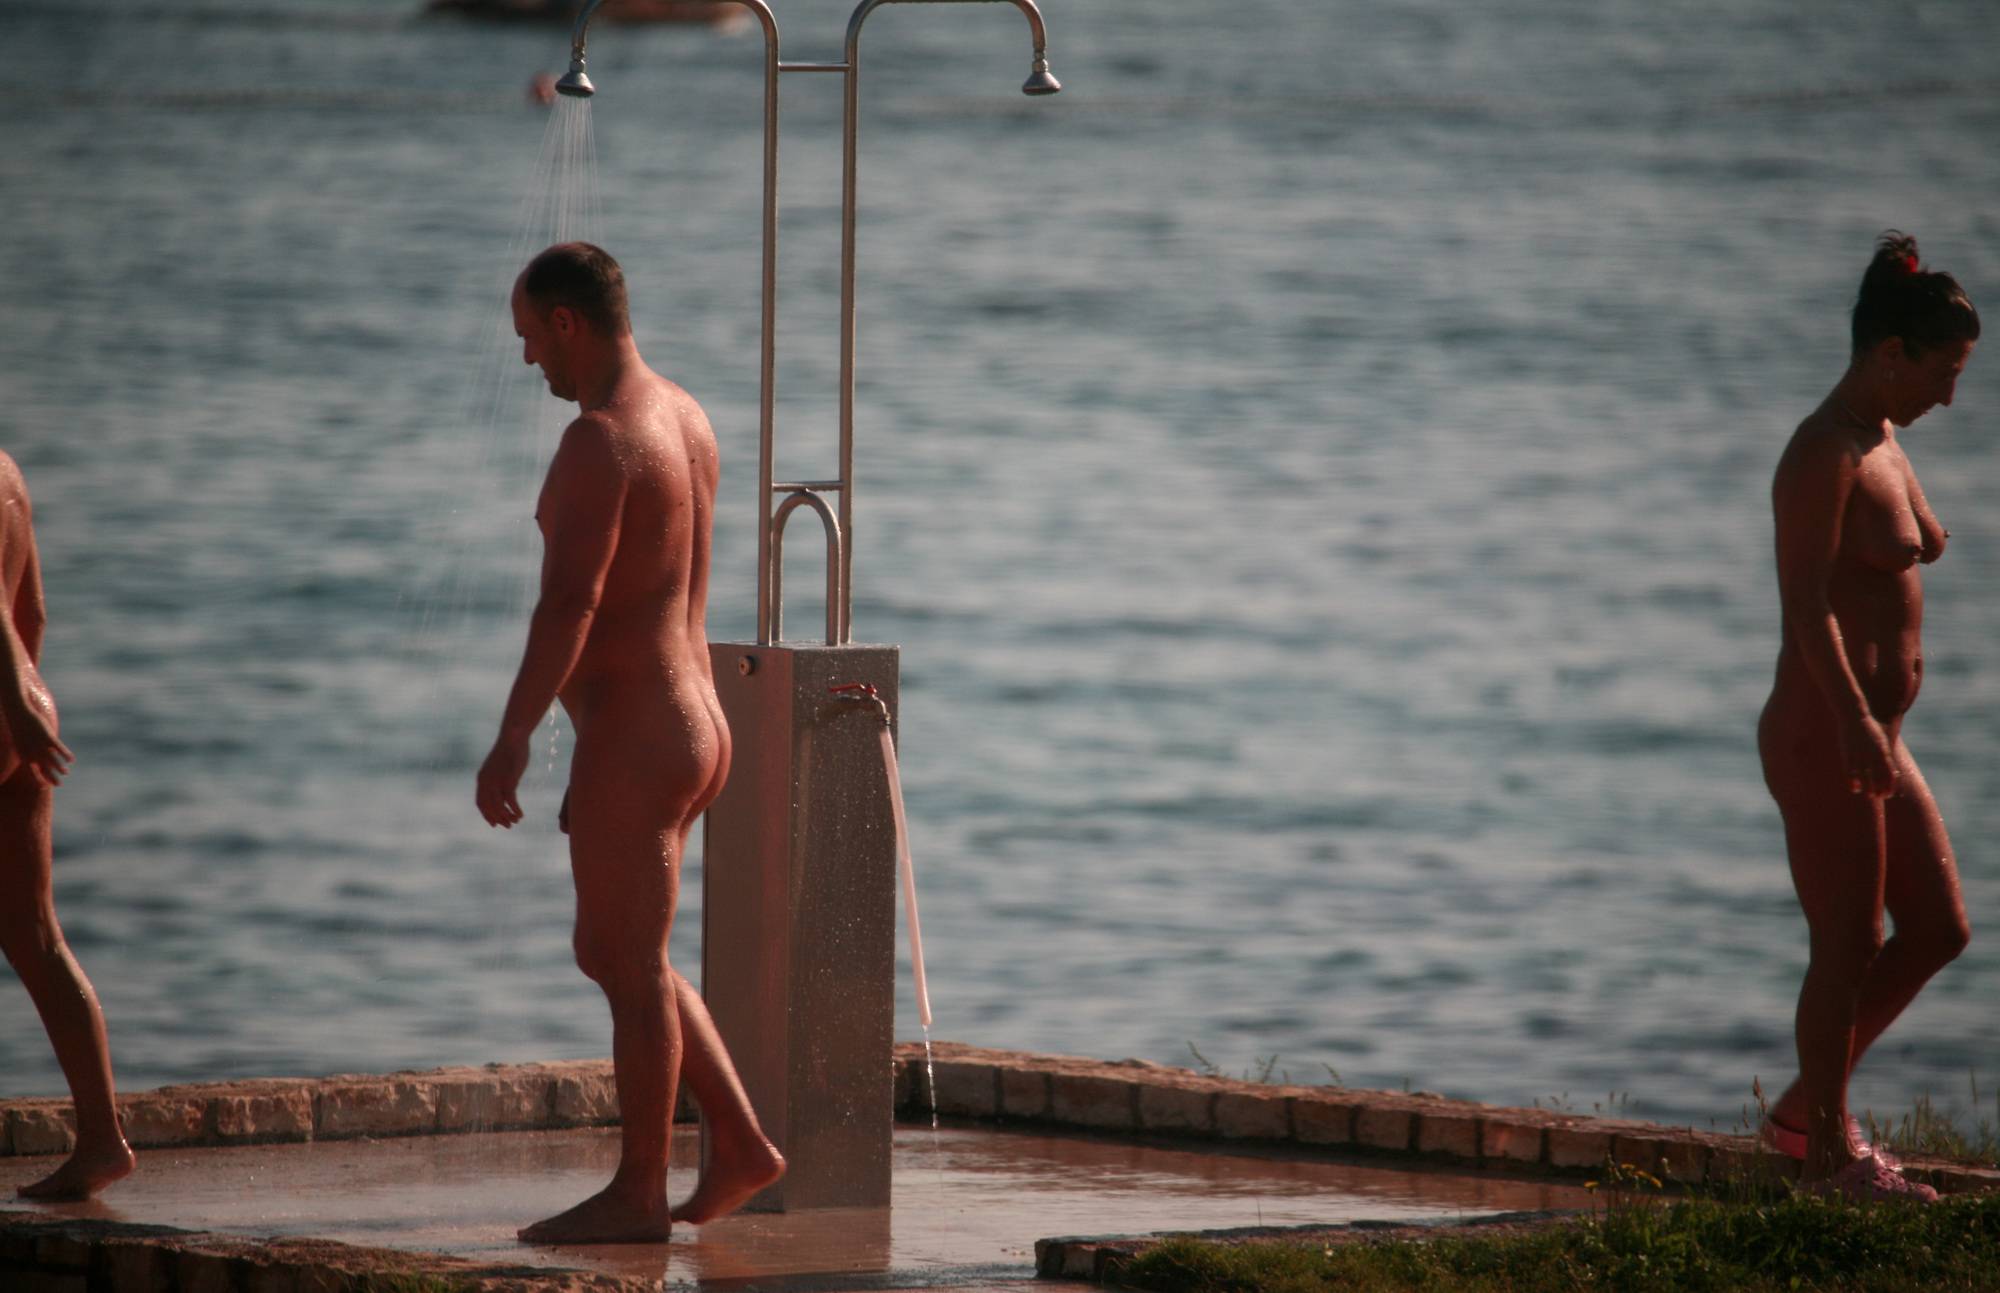 Naturist Shower at Dusk - Young Nudist